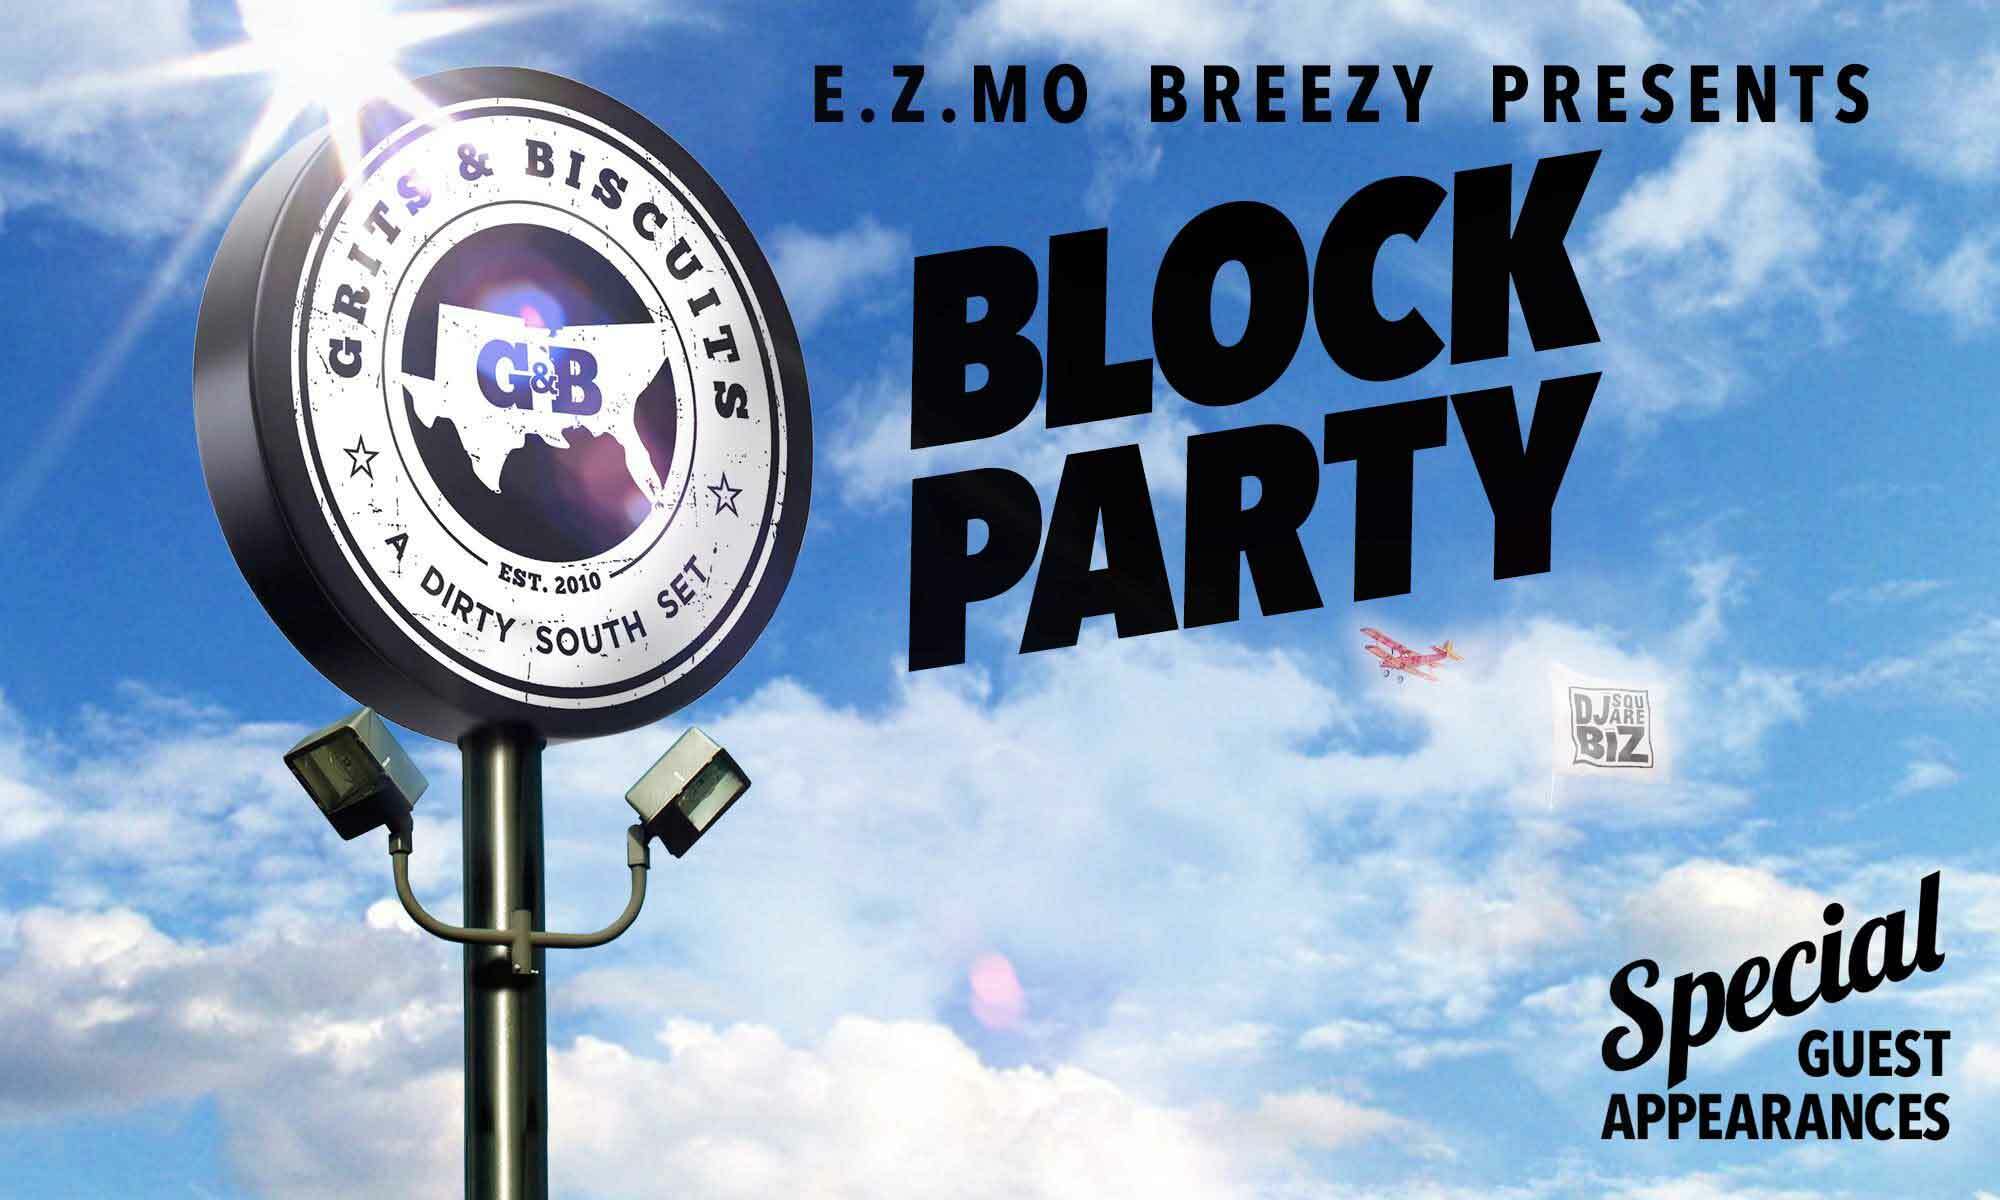 Grits & Biscuits Block Party Live Concert